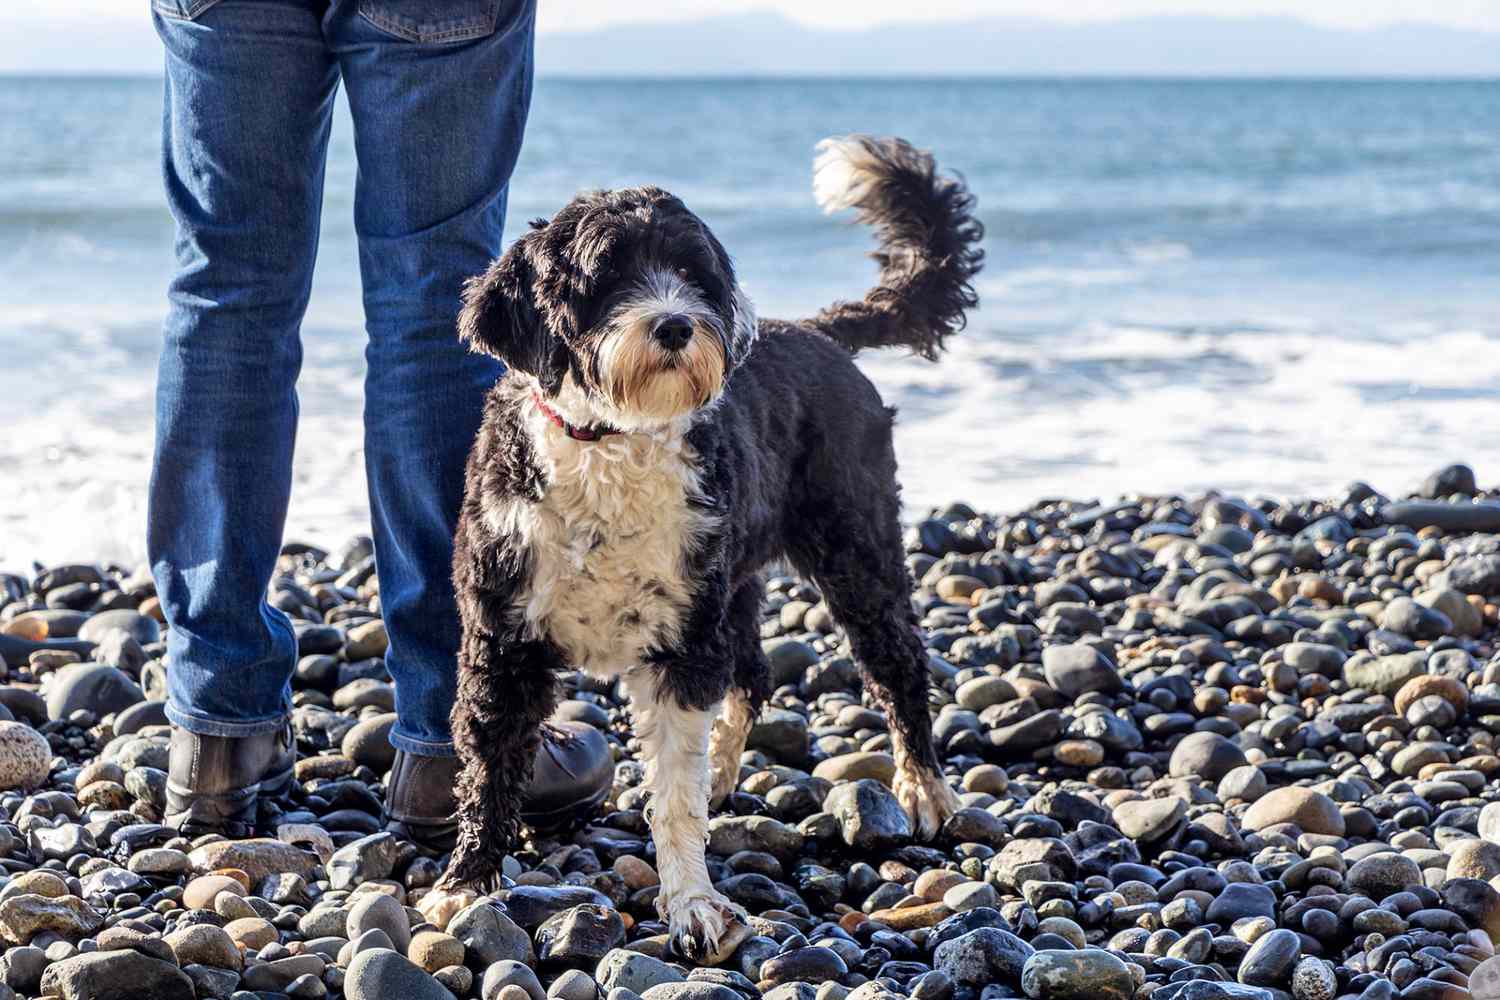 Portuguese water dog standing with man on rocks